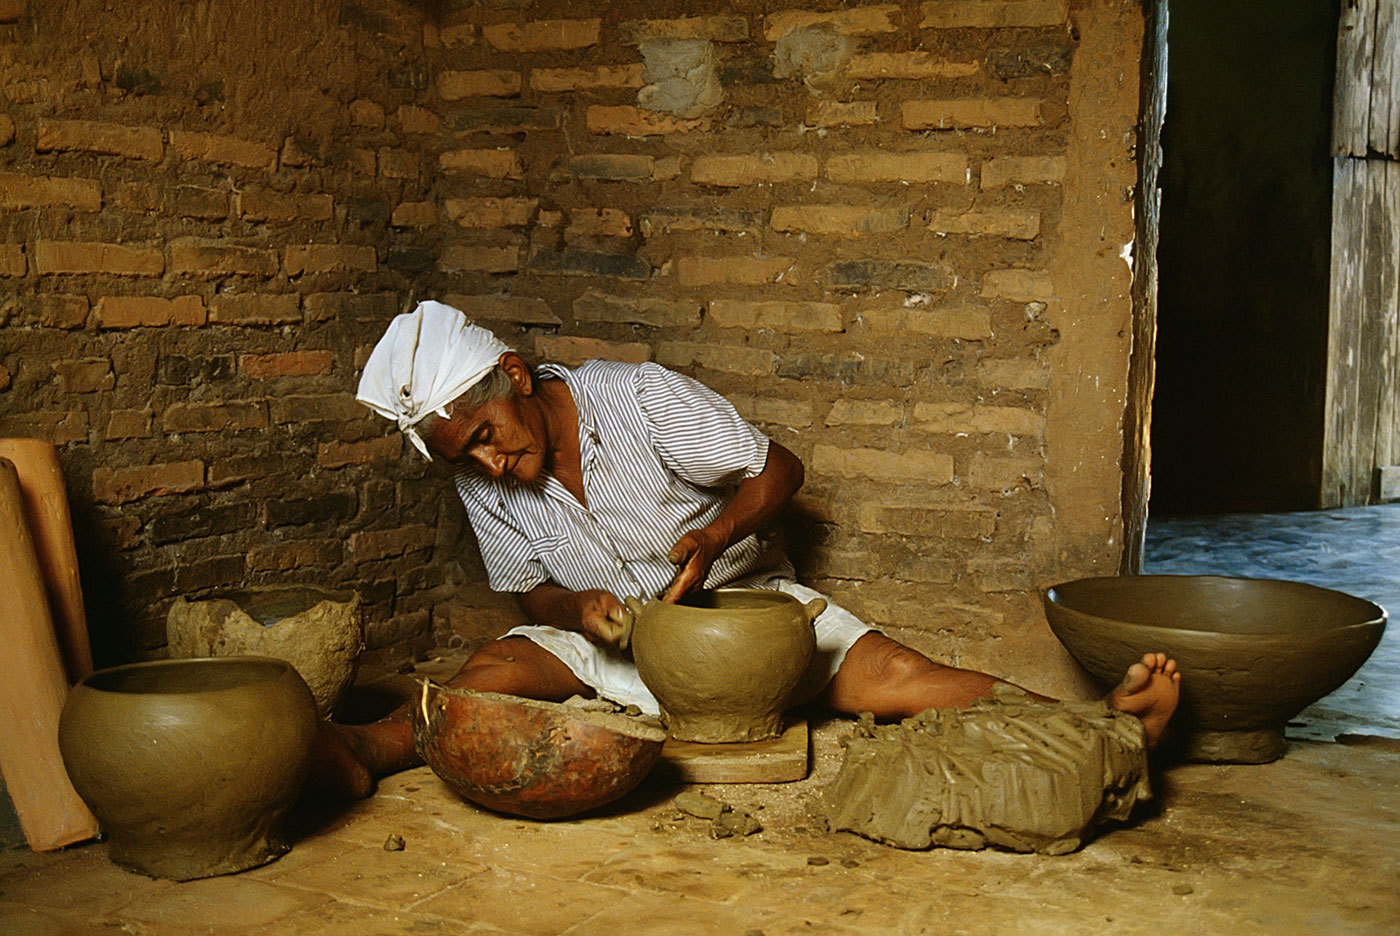 Home business - making pottery for sale, north rural Brazil : BUSINESS & INDUSTRY : Viviane Moos |  Documentary Photographer